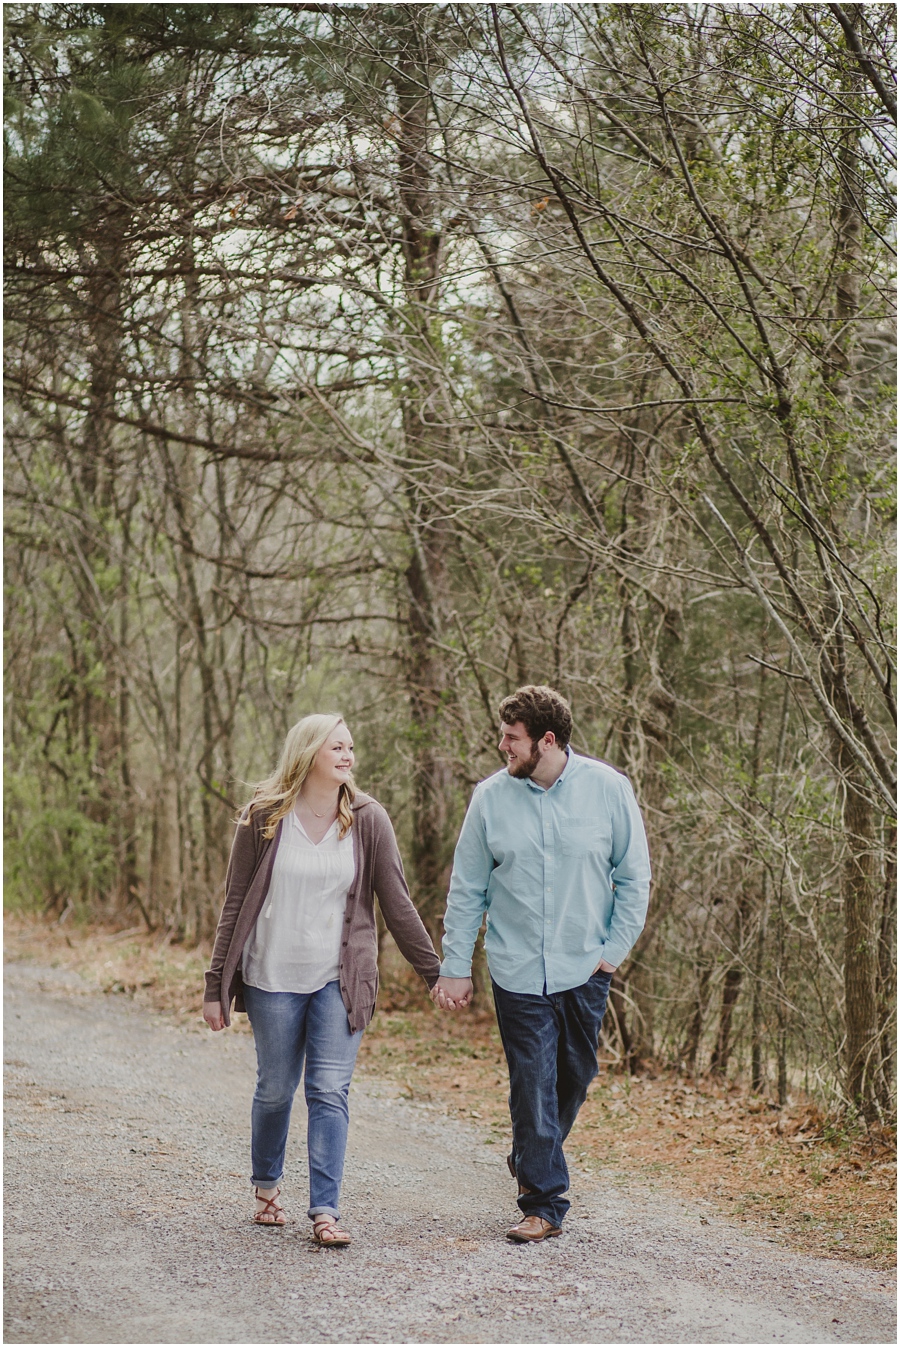 Emily and Nathan walking up the road at Meadow Hill Farm.